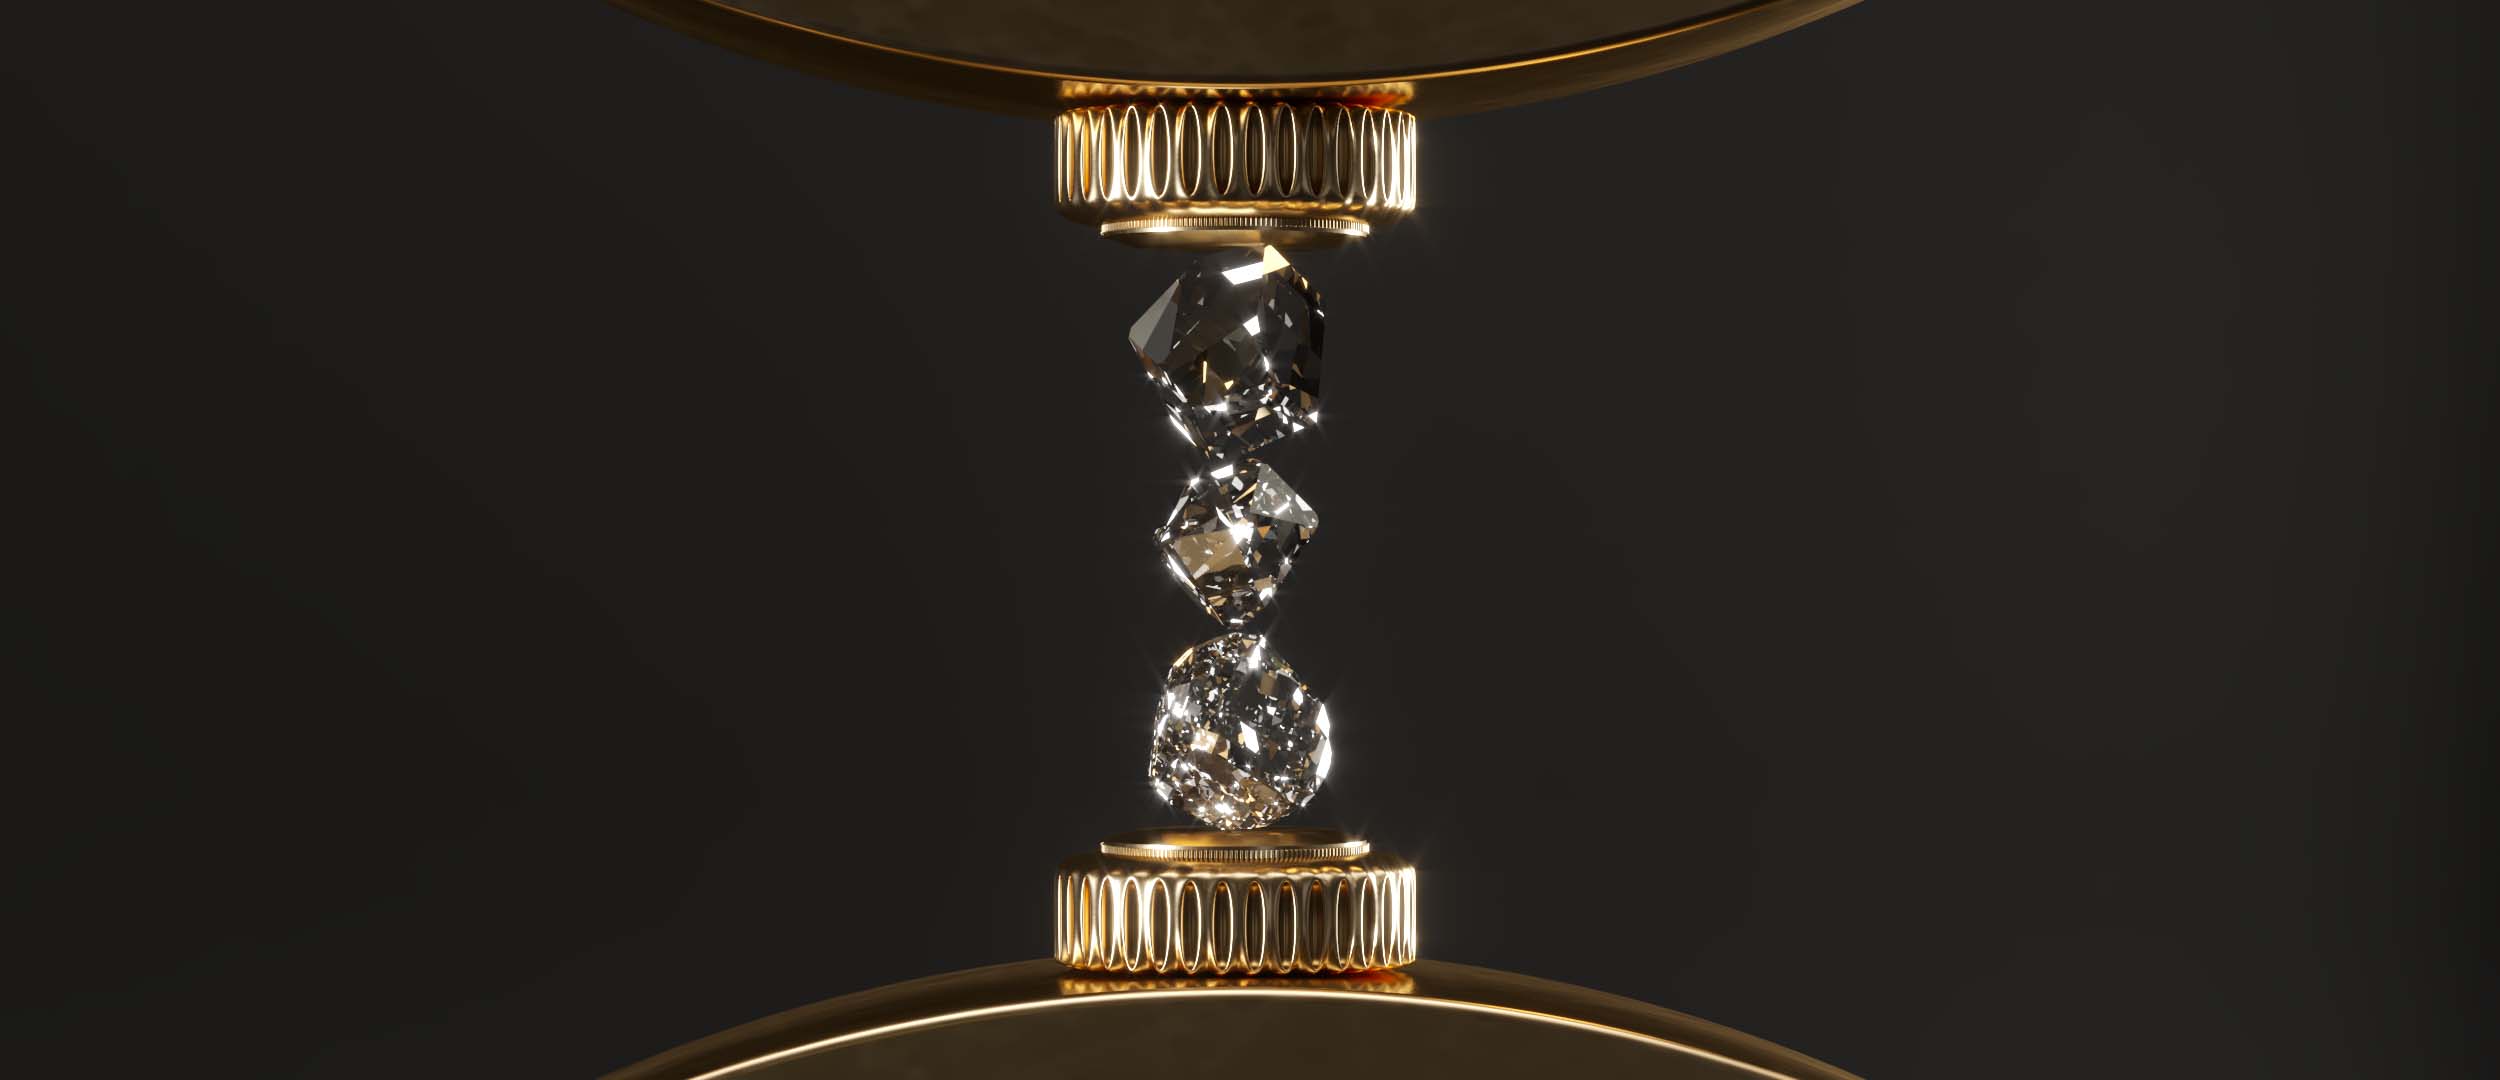 design-motion-3d-photography-octane-redshift-art-visual-animation-render-style-graphic-gold-hesibition-emirates-luxury-diamond-black-precious-jewellery-contemporary-stone-mineral-cut